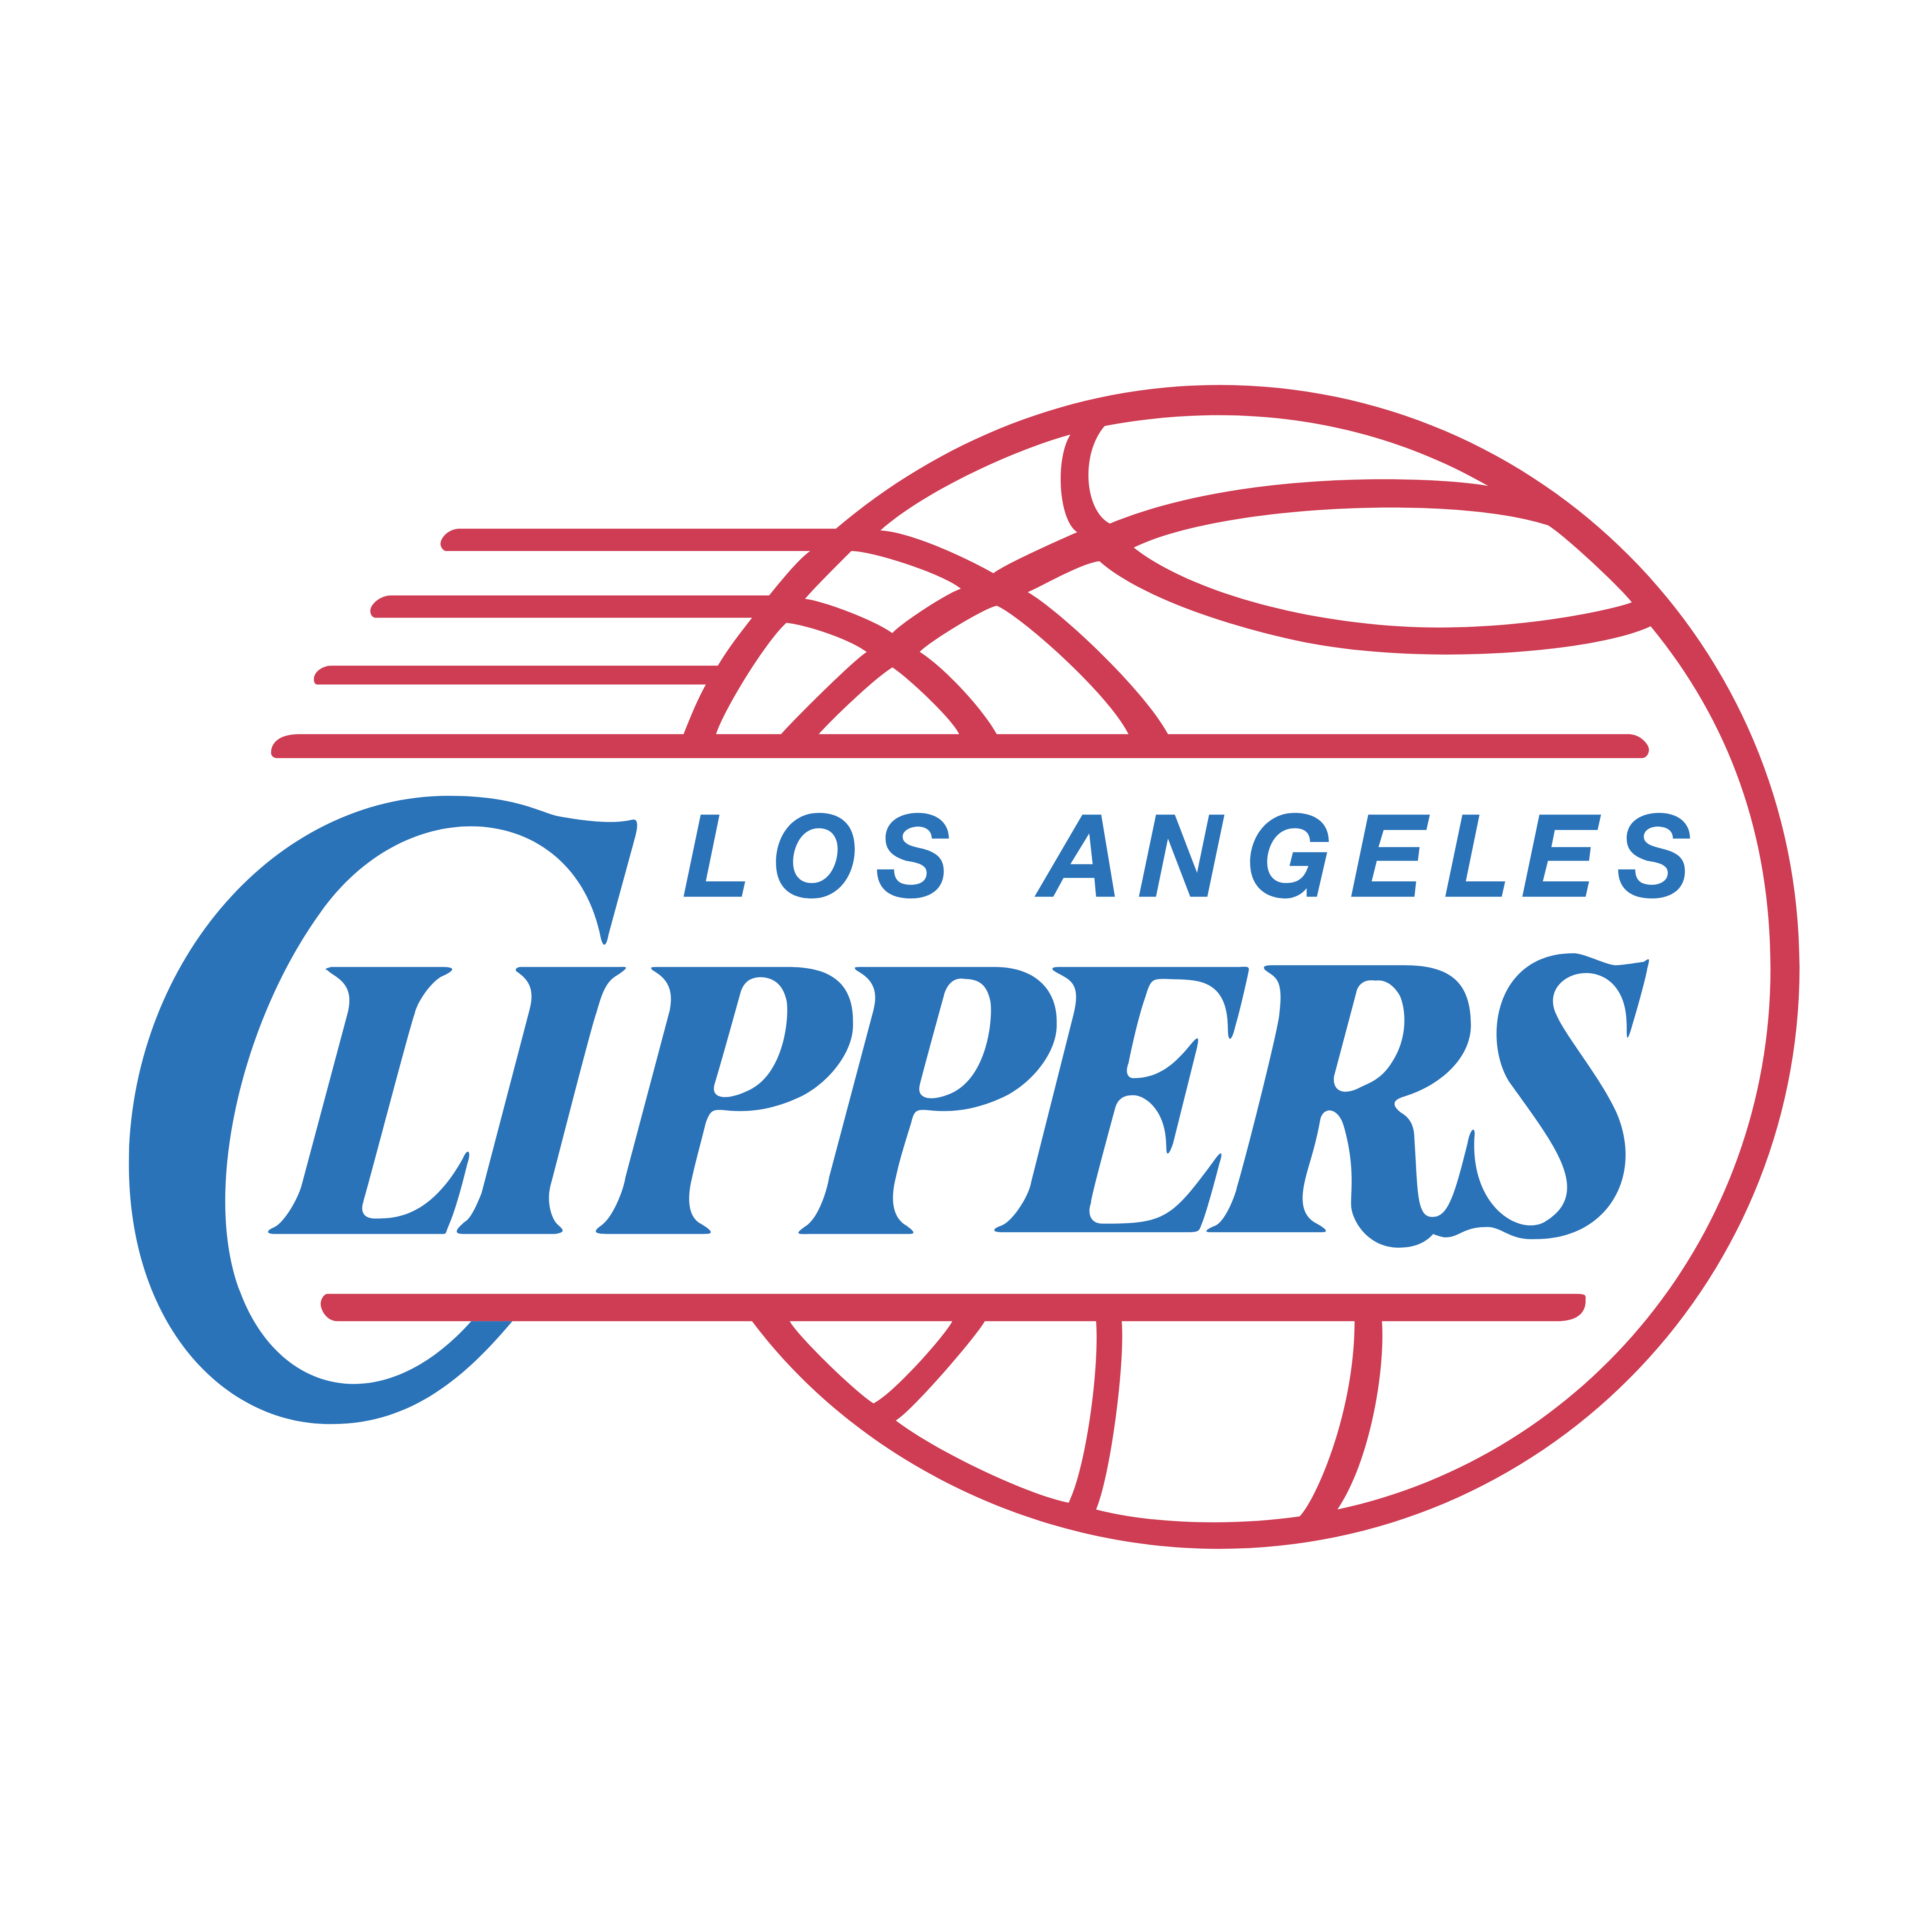 Los Angeles Clippers Logos Download